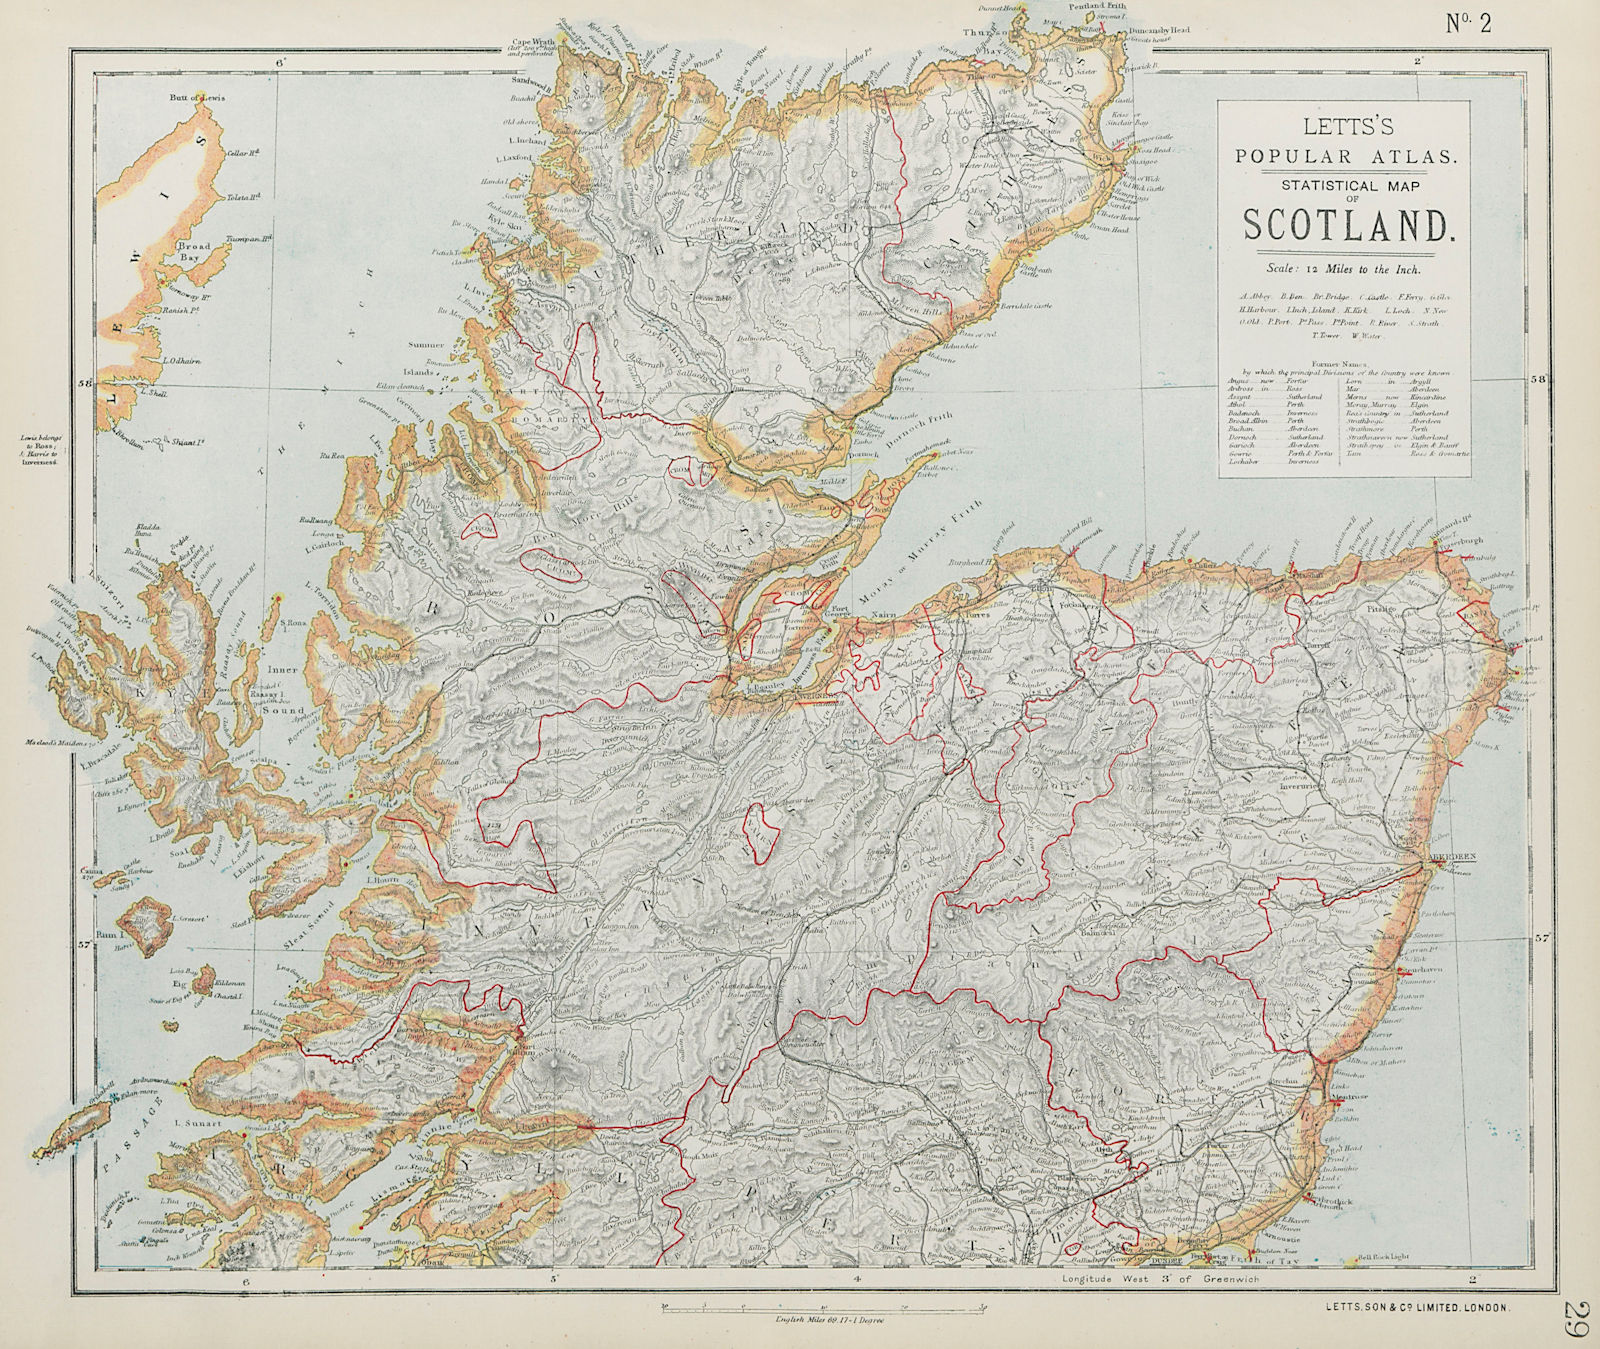 SCOTLAND NORTH. Highlands & islands. Counties. LETTS 1884 old antique map